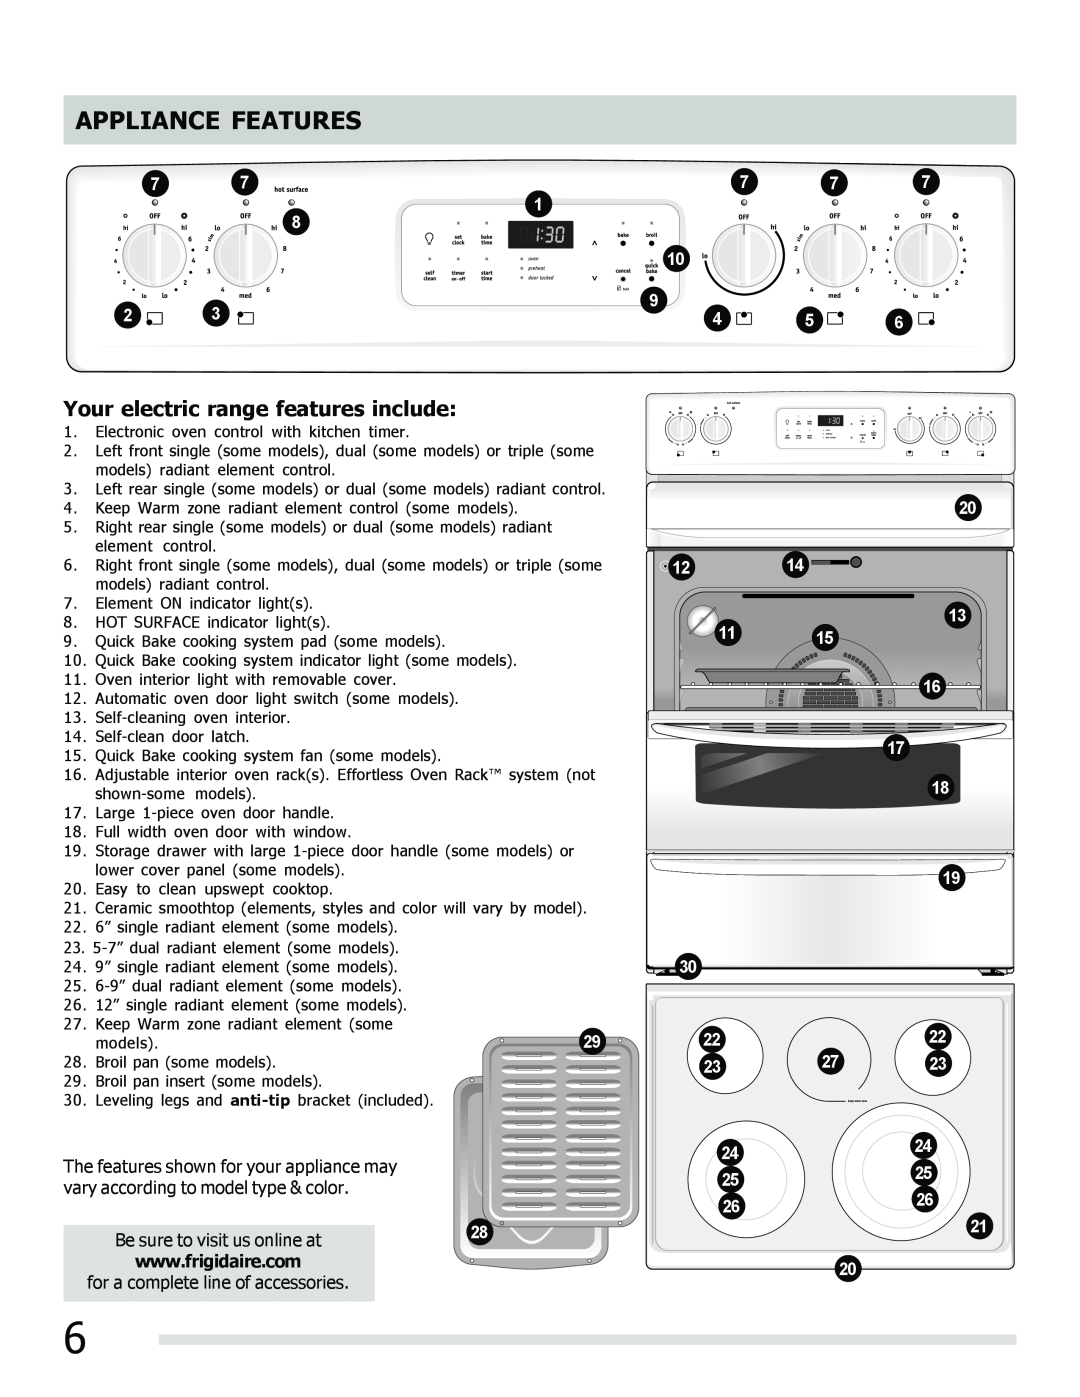 Frigidaire FGEF3030PF important safety instructions Appliance Features, Your electric range features include 